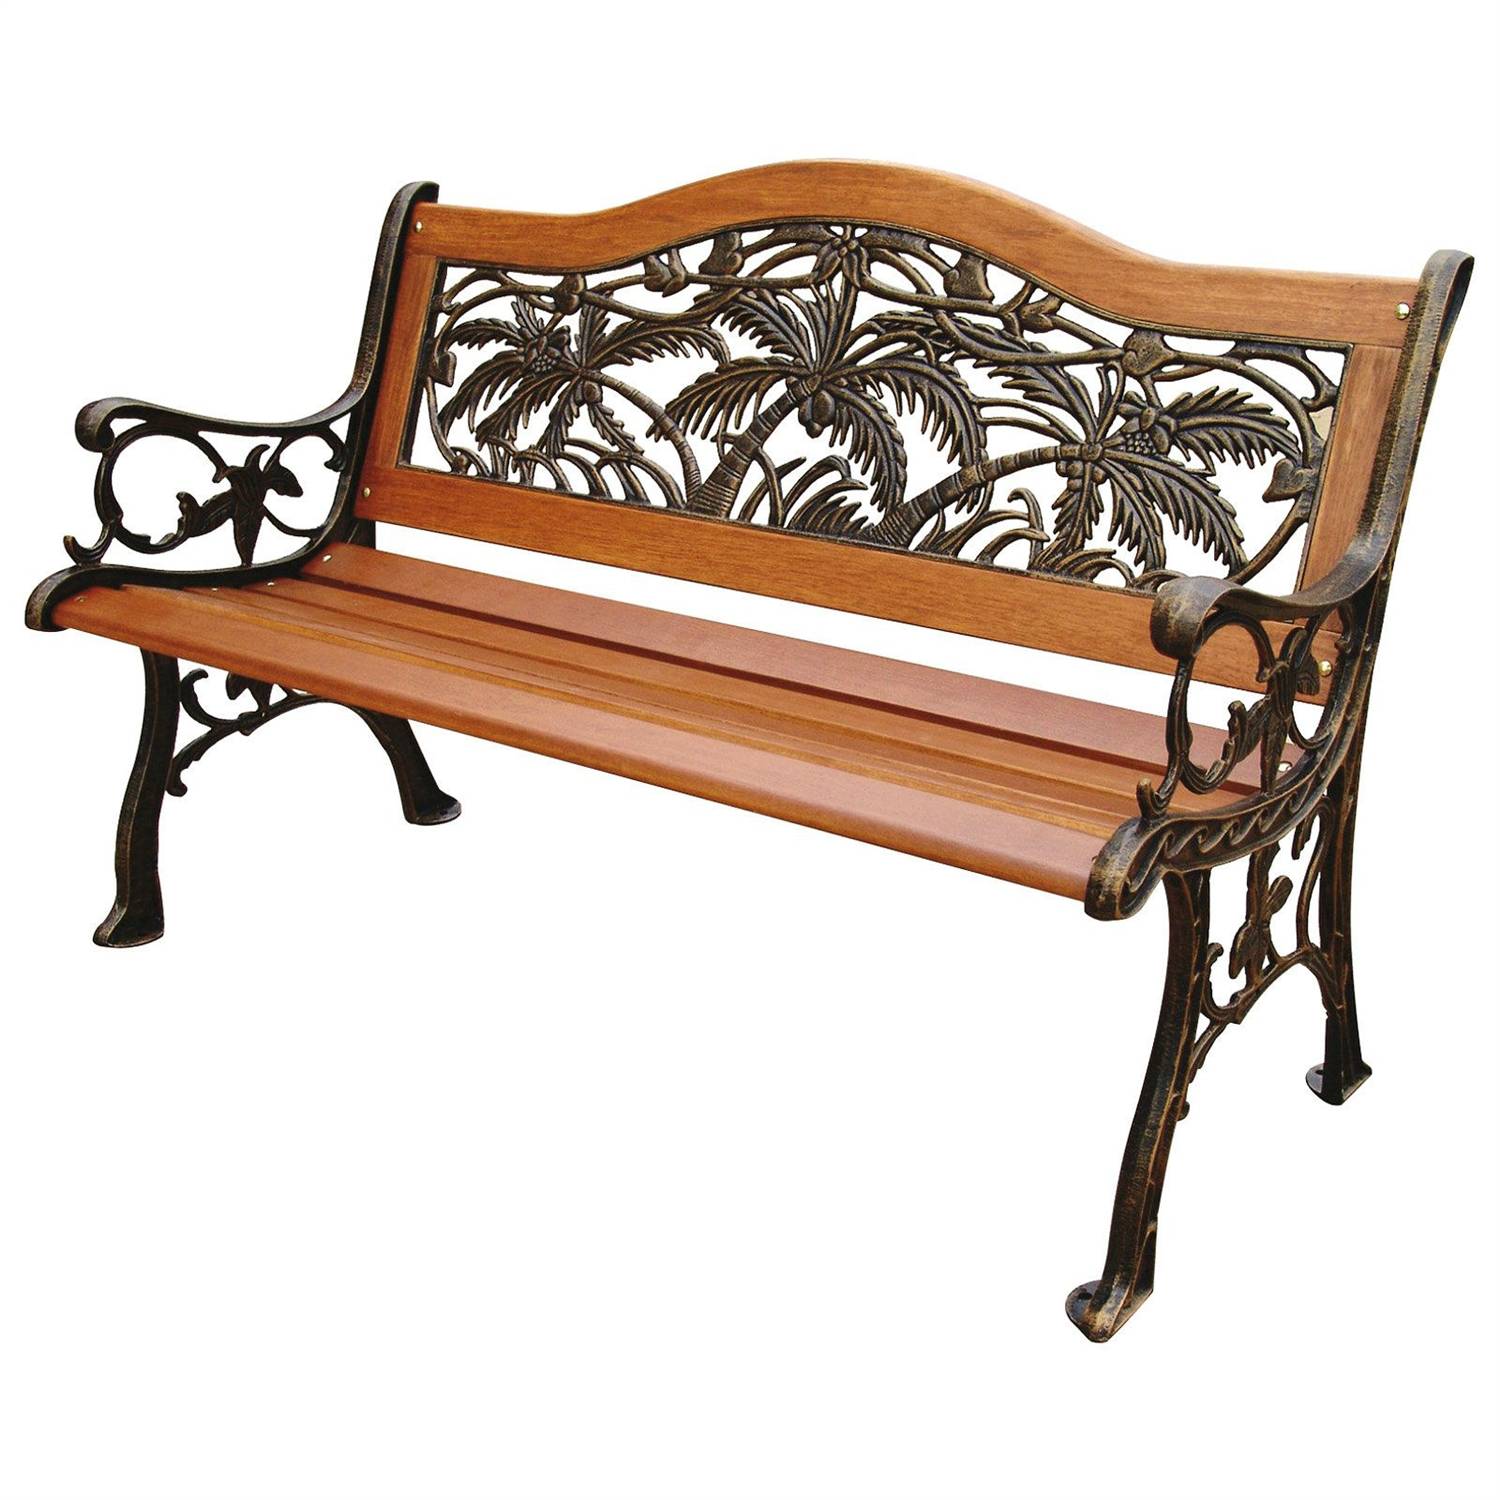 A Cast Iron And Wood Garden Bench